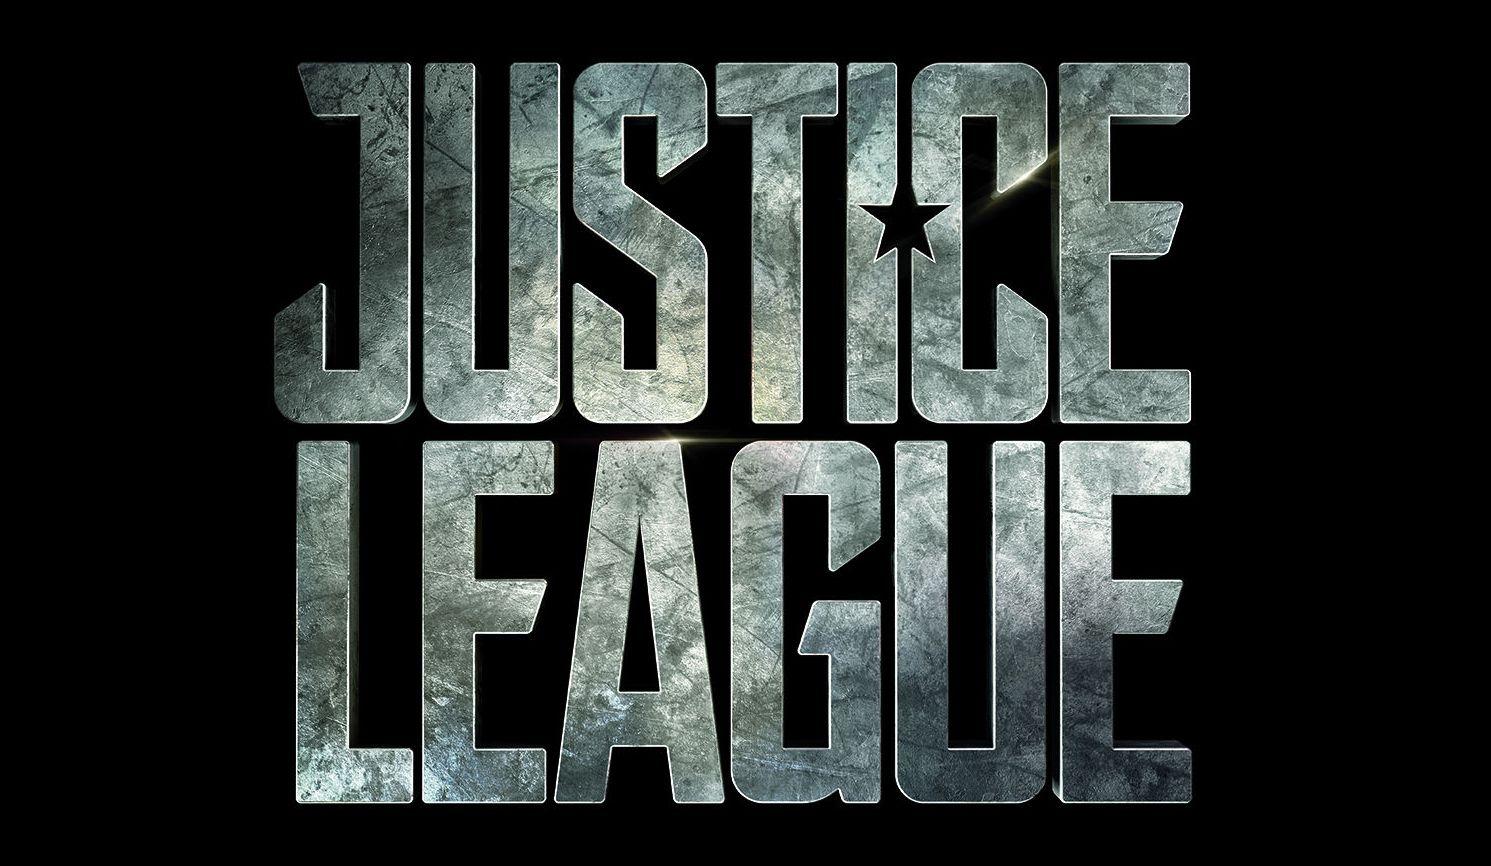 Cool Movie Logo - Warner Bros. Gives Their JUSTICE LEAGUE Movie Logo a Better Paint Job